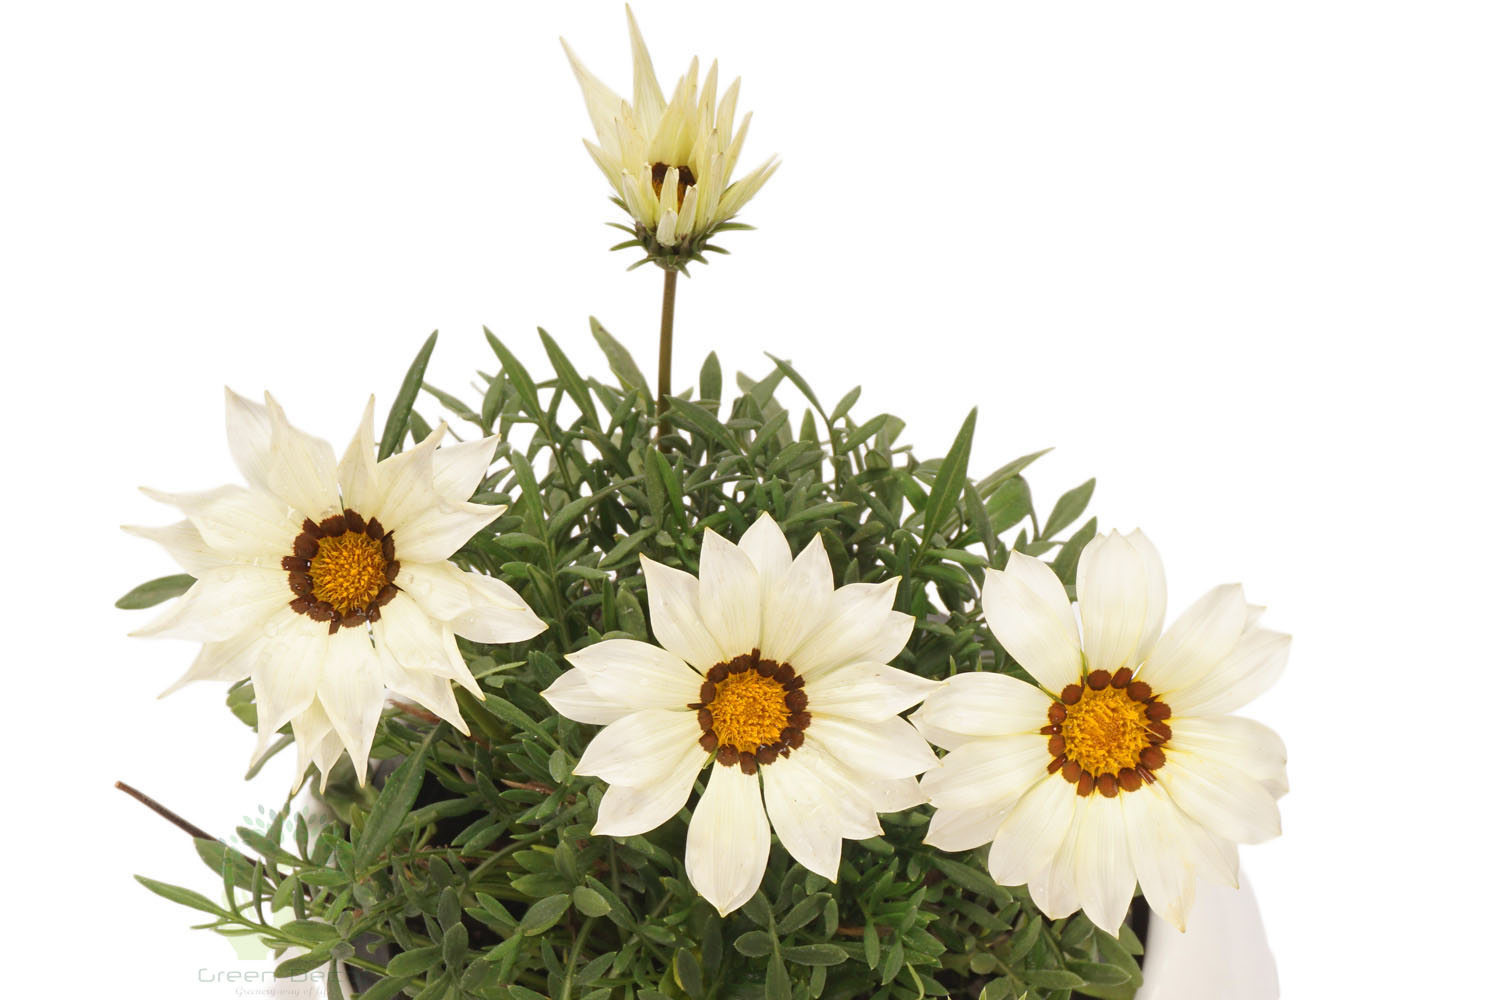 Buy Gazania Plants , White Pots and seeds in Delhi NCR by the best online nursery shop Greendecor.